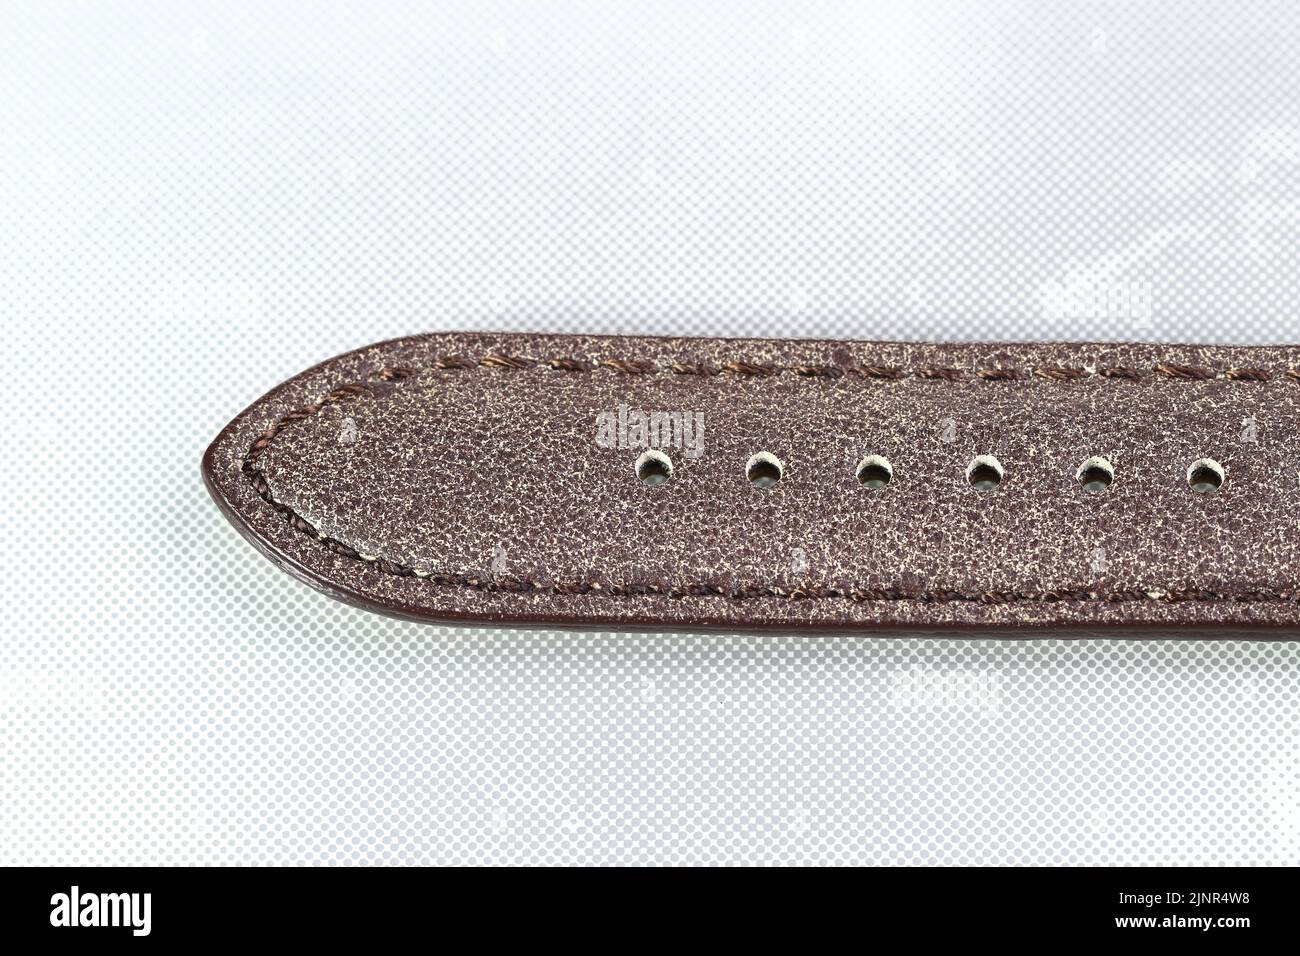 Closeup detail of luxury Watch straps, Genuine handcraft italian calfskin leather with white top stitching isolated on white background. Stock Photo